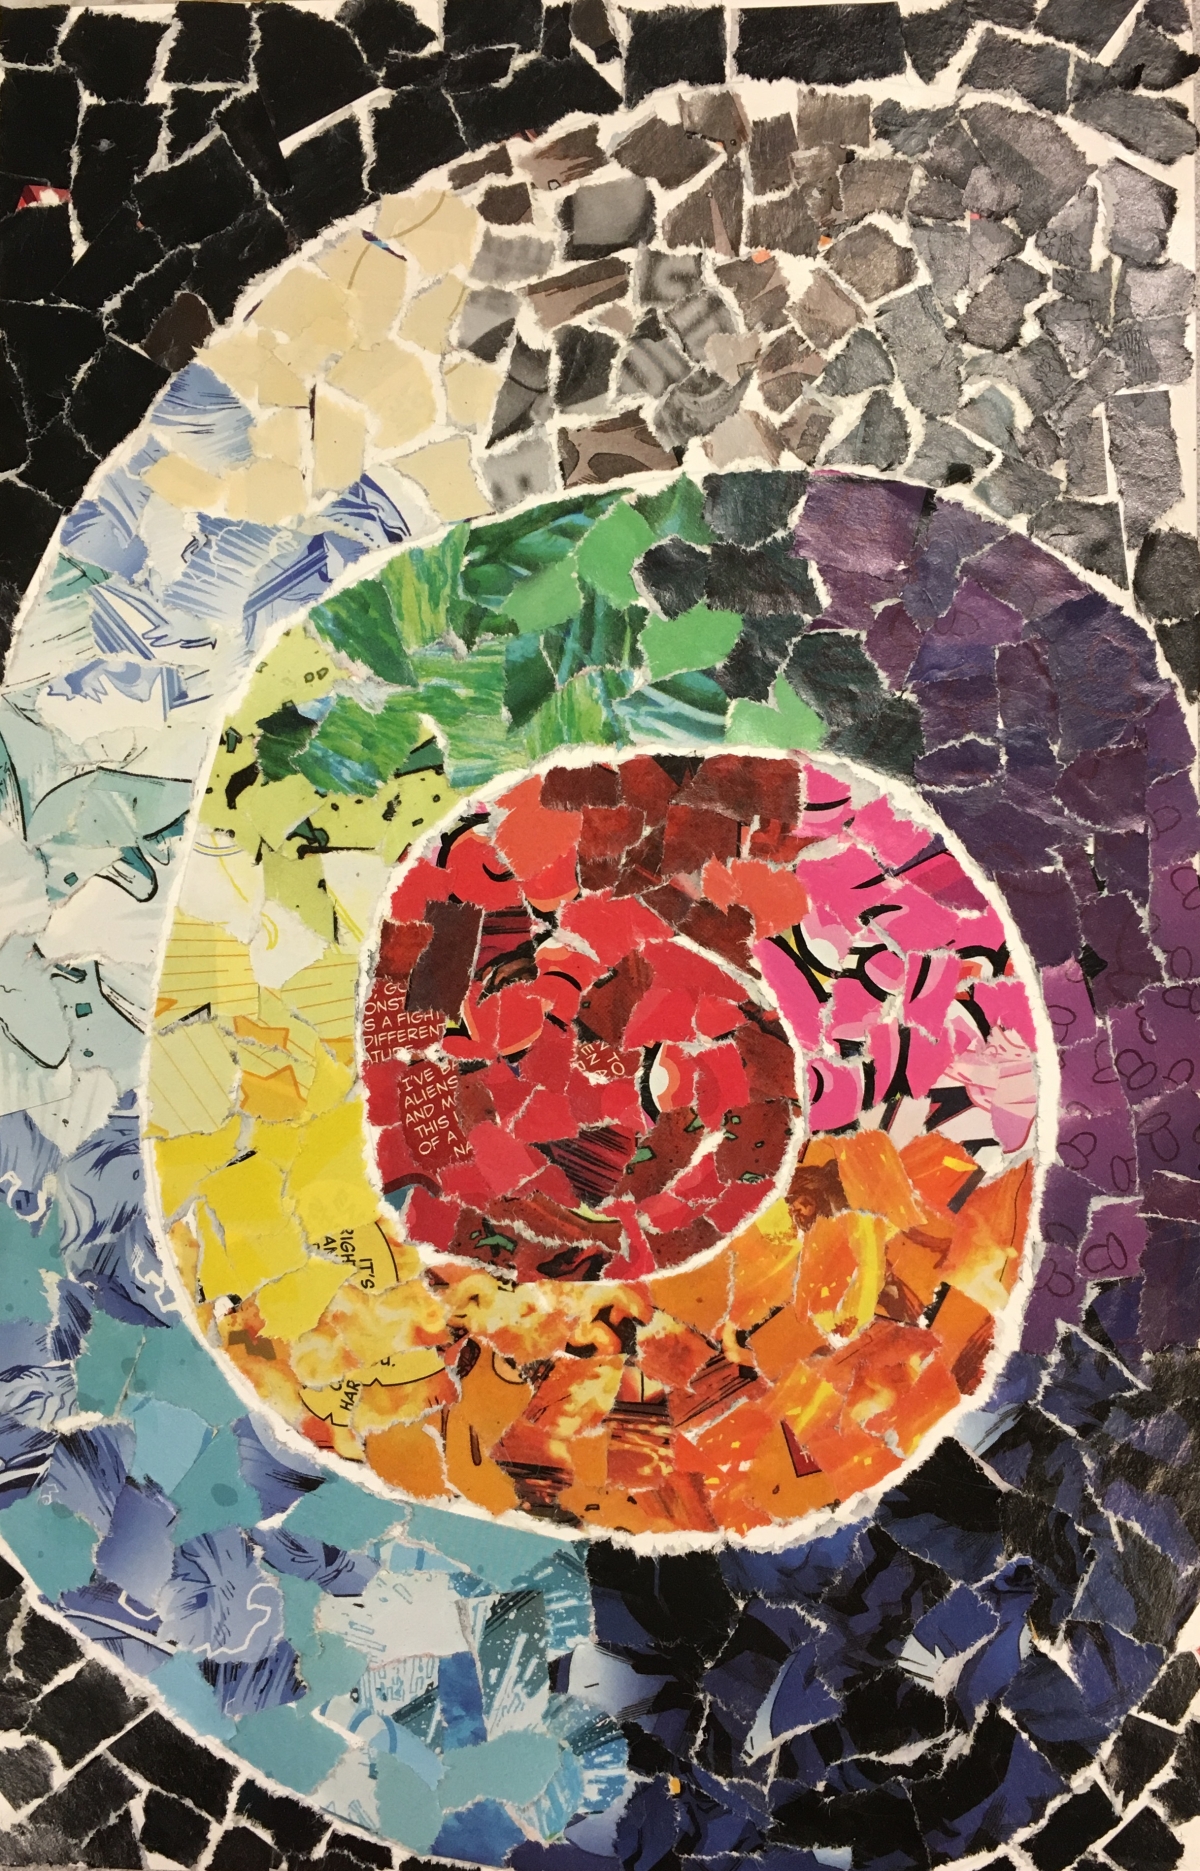 a colorful mosaic art spiral made of small pieces of magazine pages